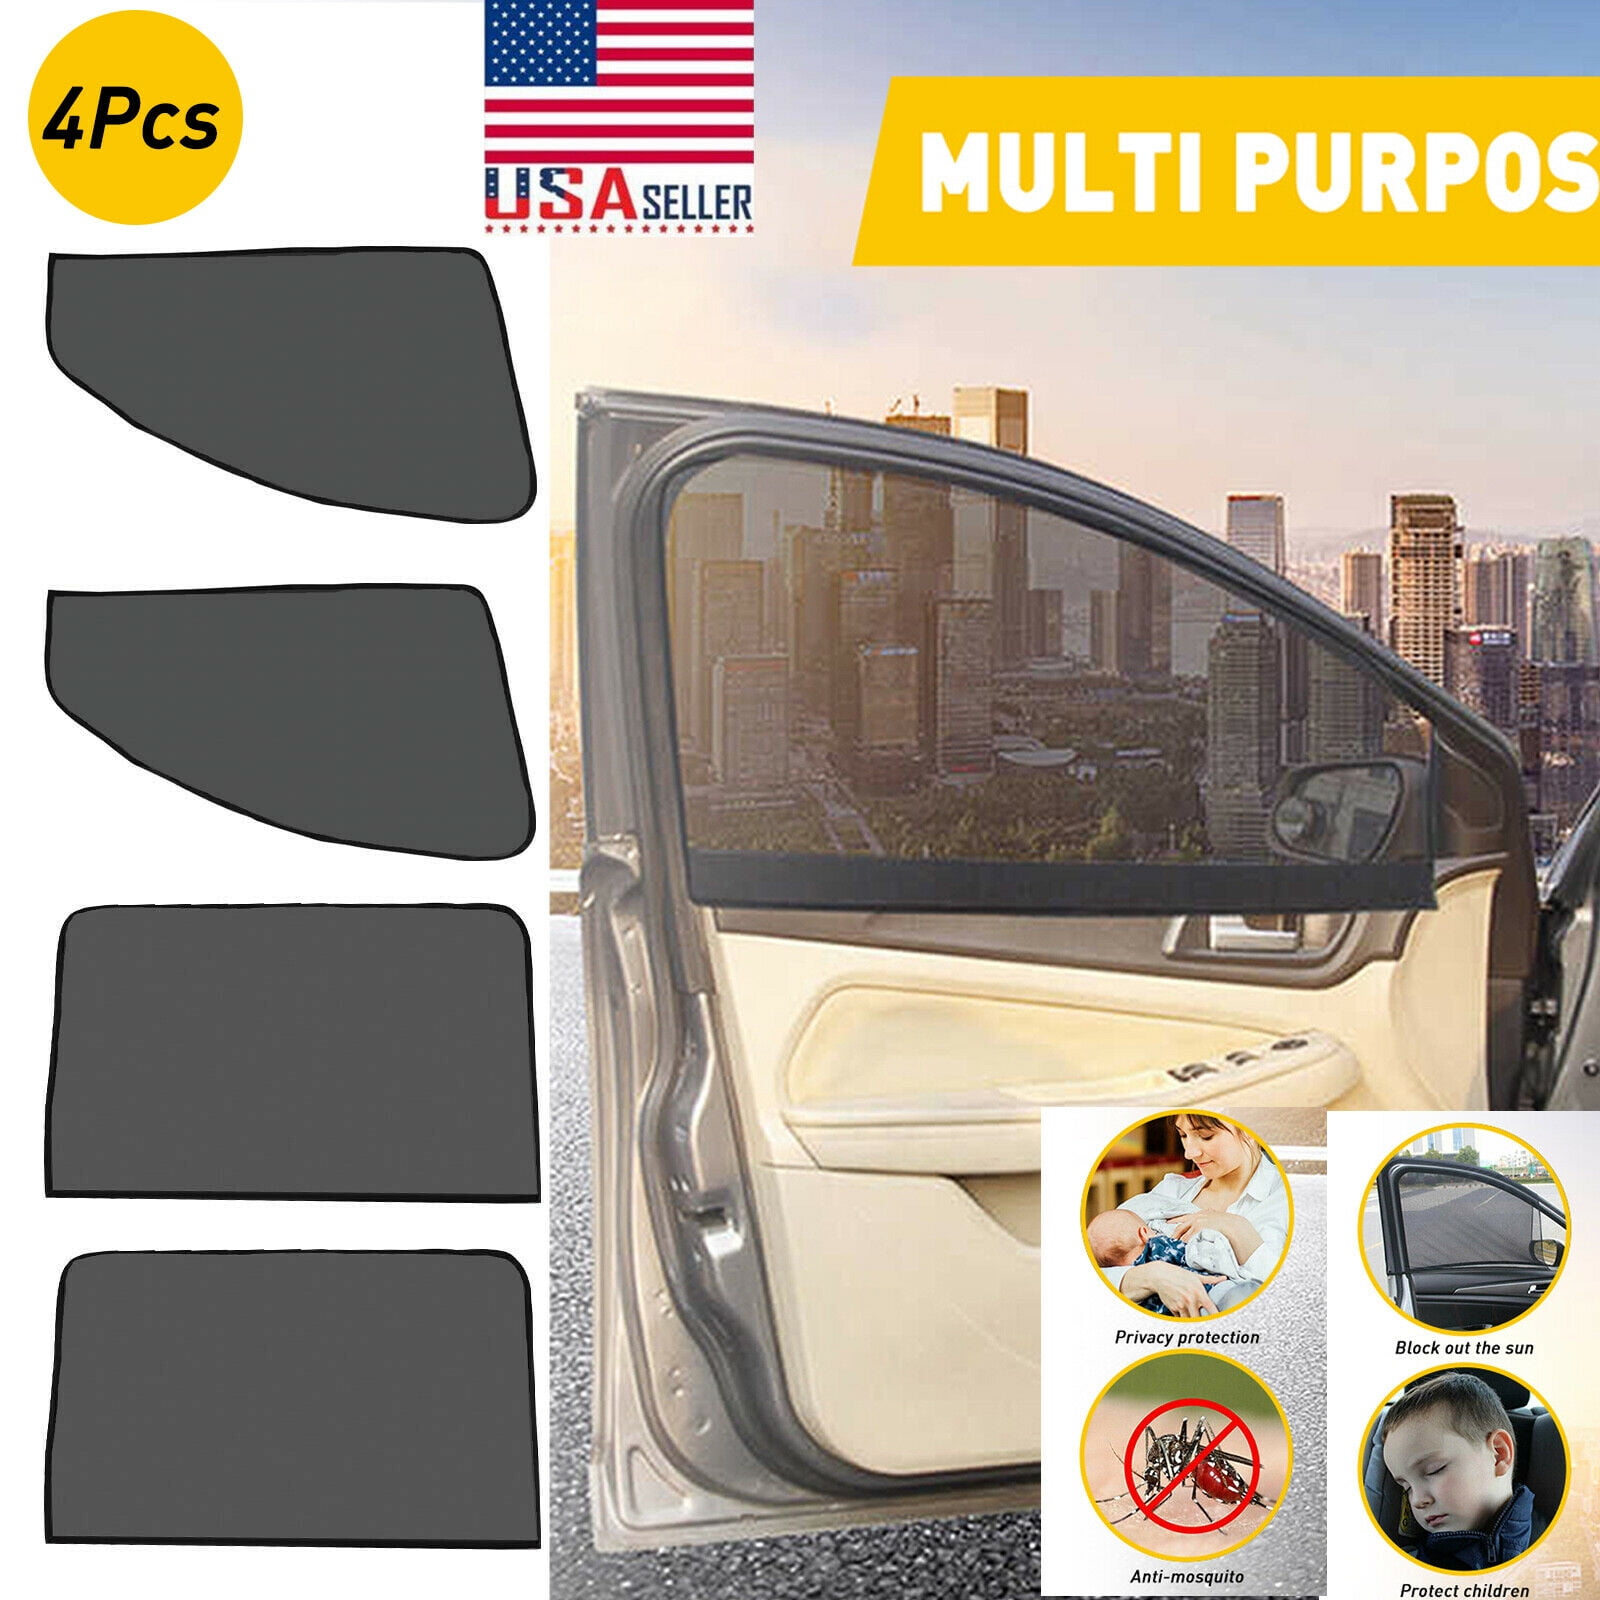 2 packs set Premium Mesh Car Sun Shades Cover for rear side window UV Protection| Blocks Sun glare and allows fresh air flow Easy installation 